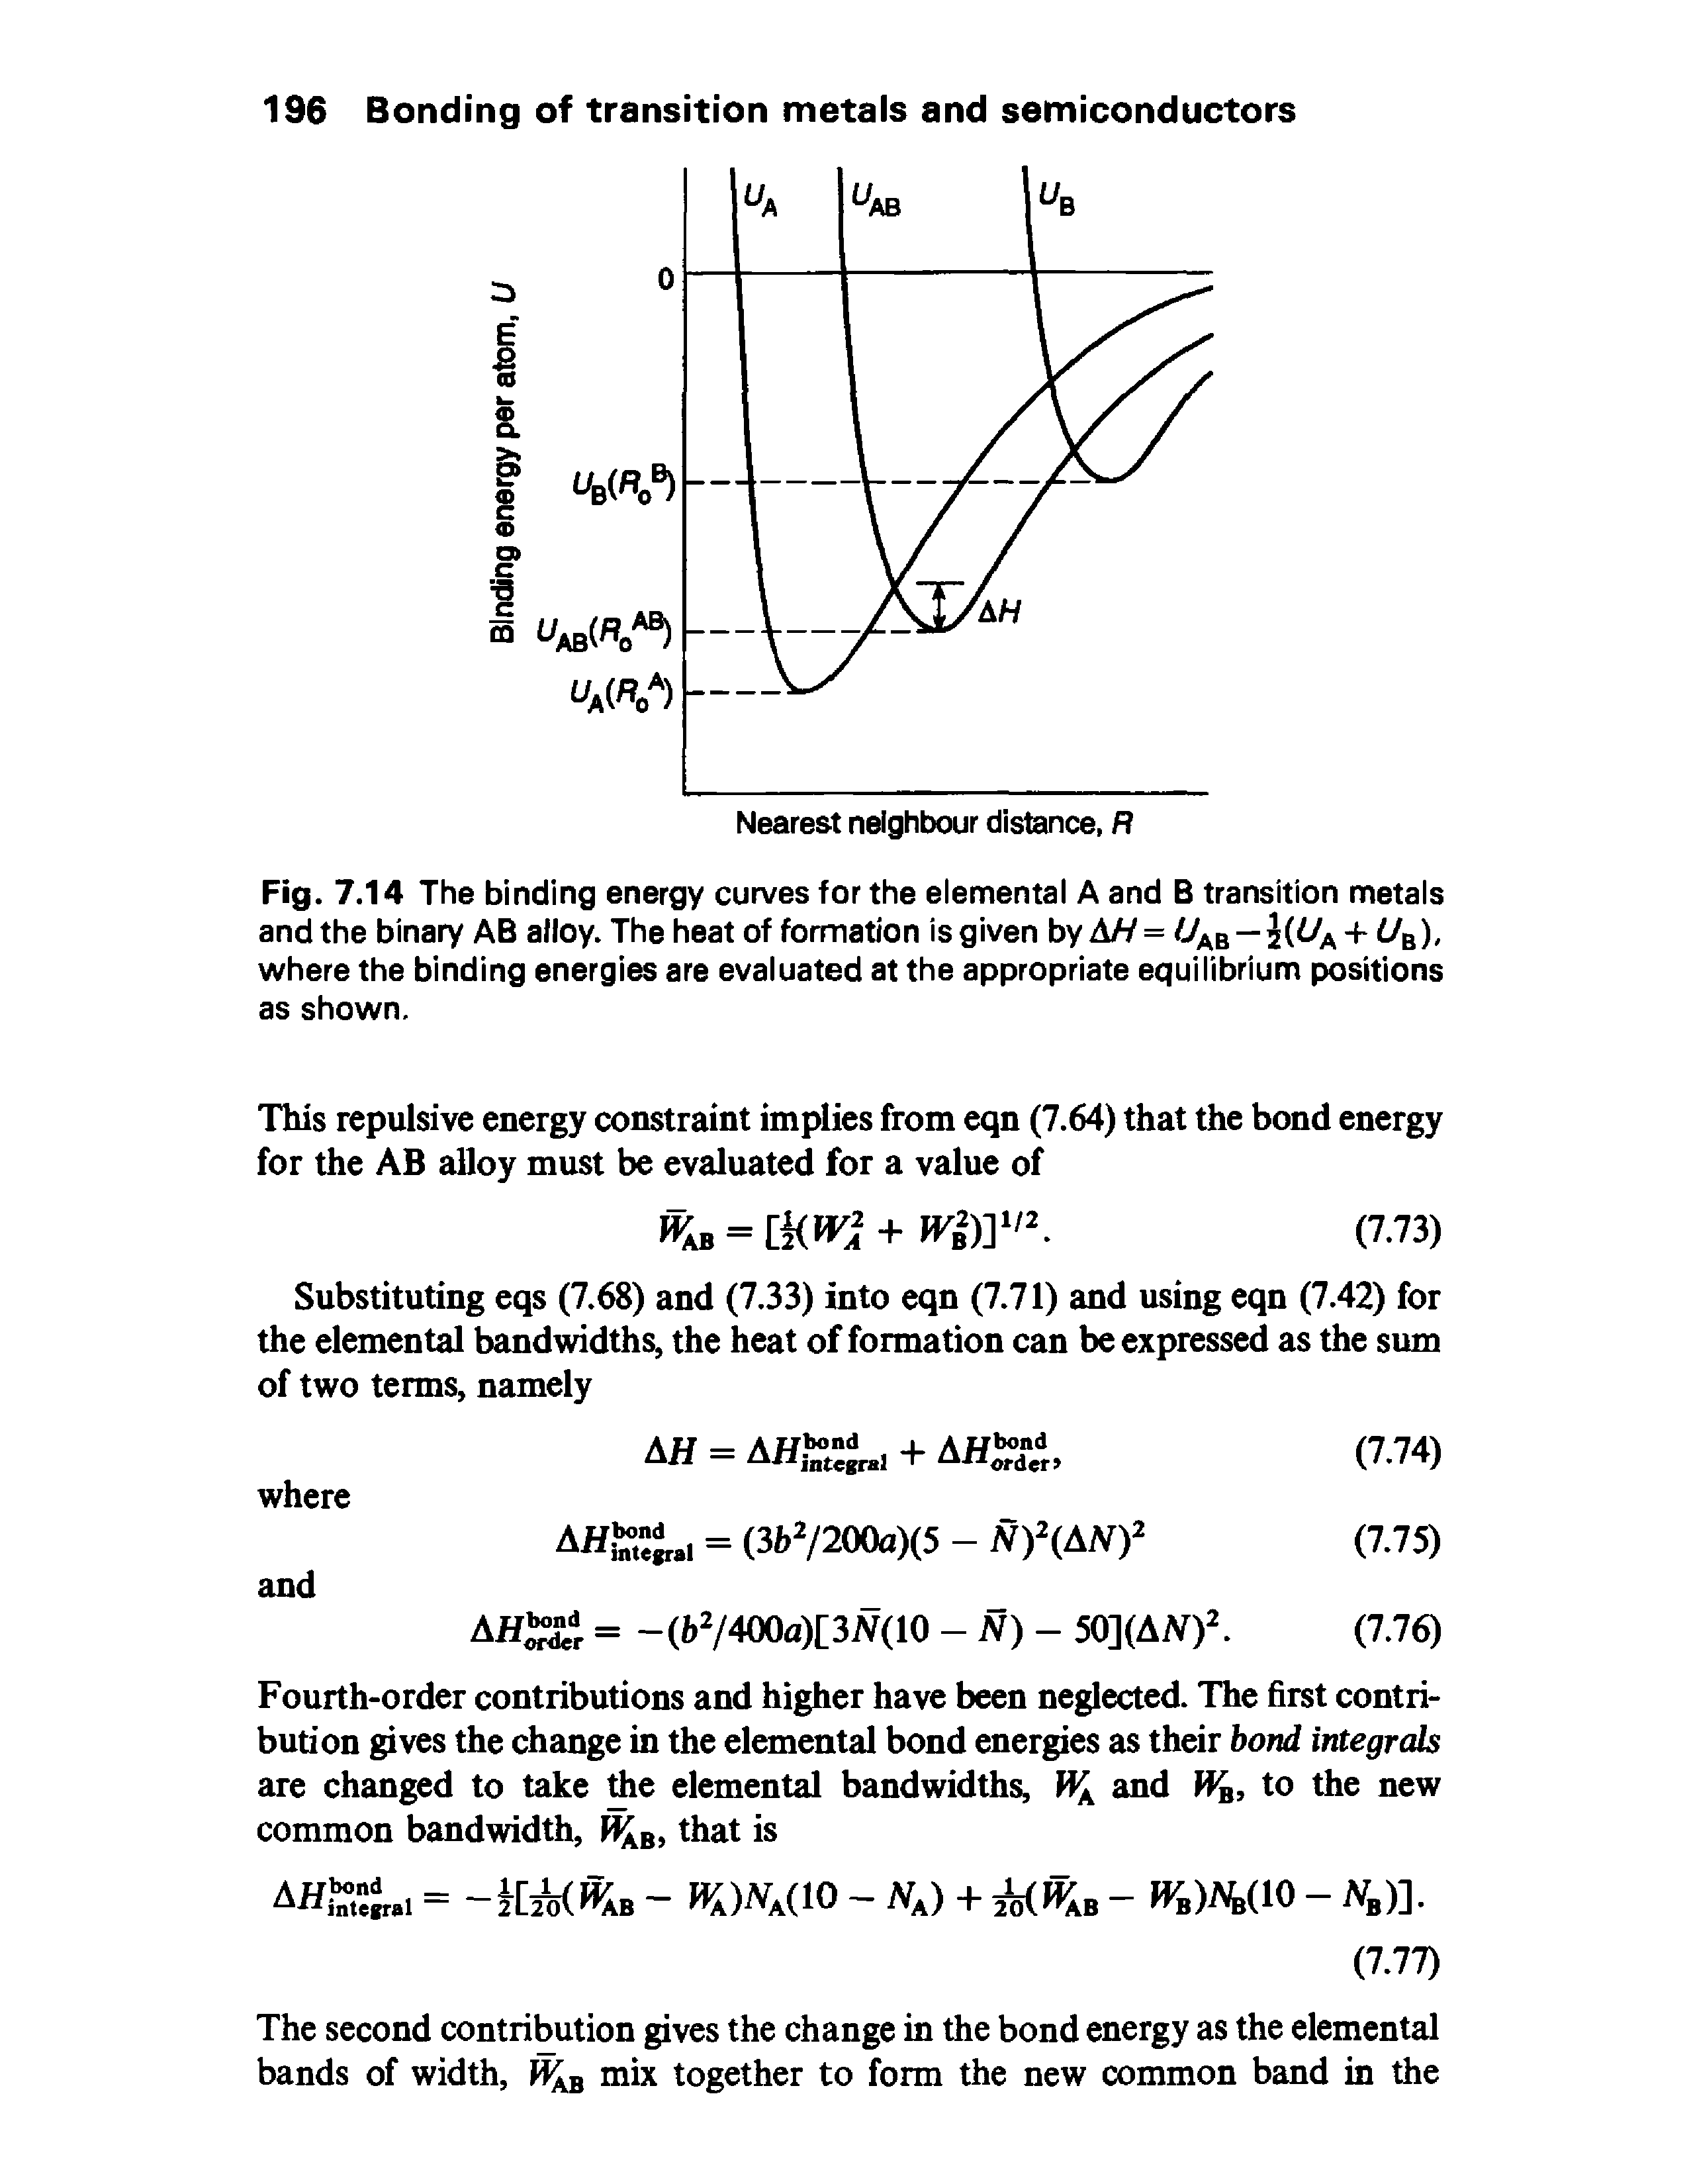 Fig. 7.14 The binding energy curves for the elemental A and transition metals and the binary AB alloy. The heat of formation is given by AH = UAB—2(i/A + UB), where the binding energies are evaluated at the appropriate equilibrium positions as shown.